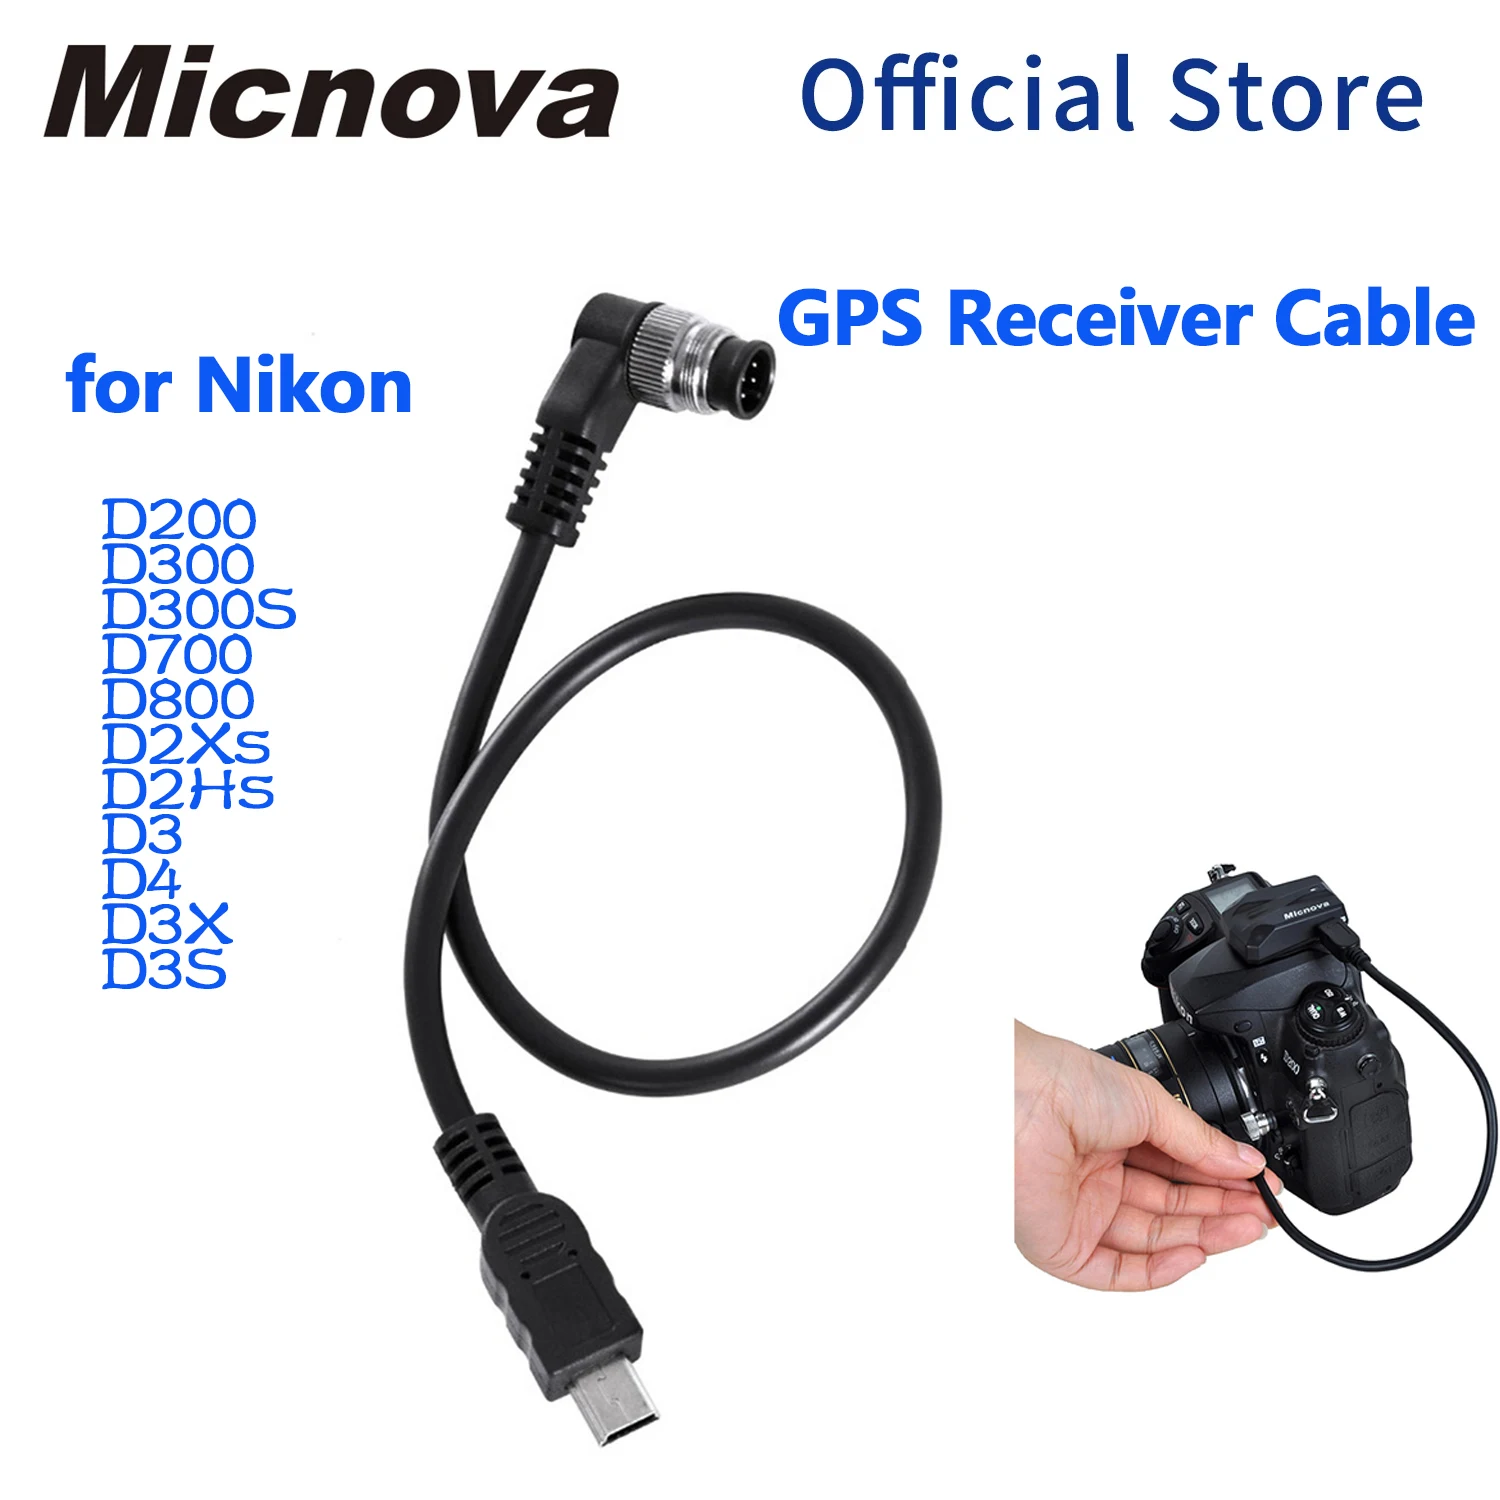 Sevenoak Electronic Cable For Camera Gps For Nikon D200 D300 D300s D700 D800 D2xs D3 D4 D3x D3s - Photo Studio Kits - AliExpress